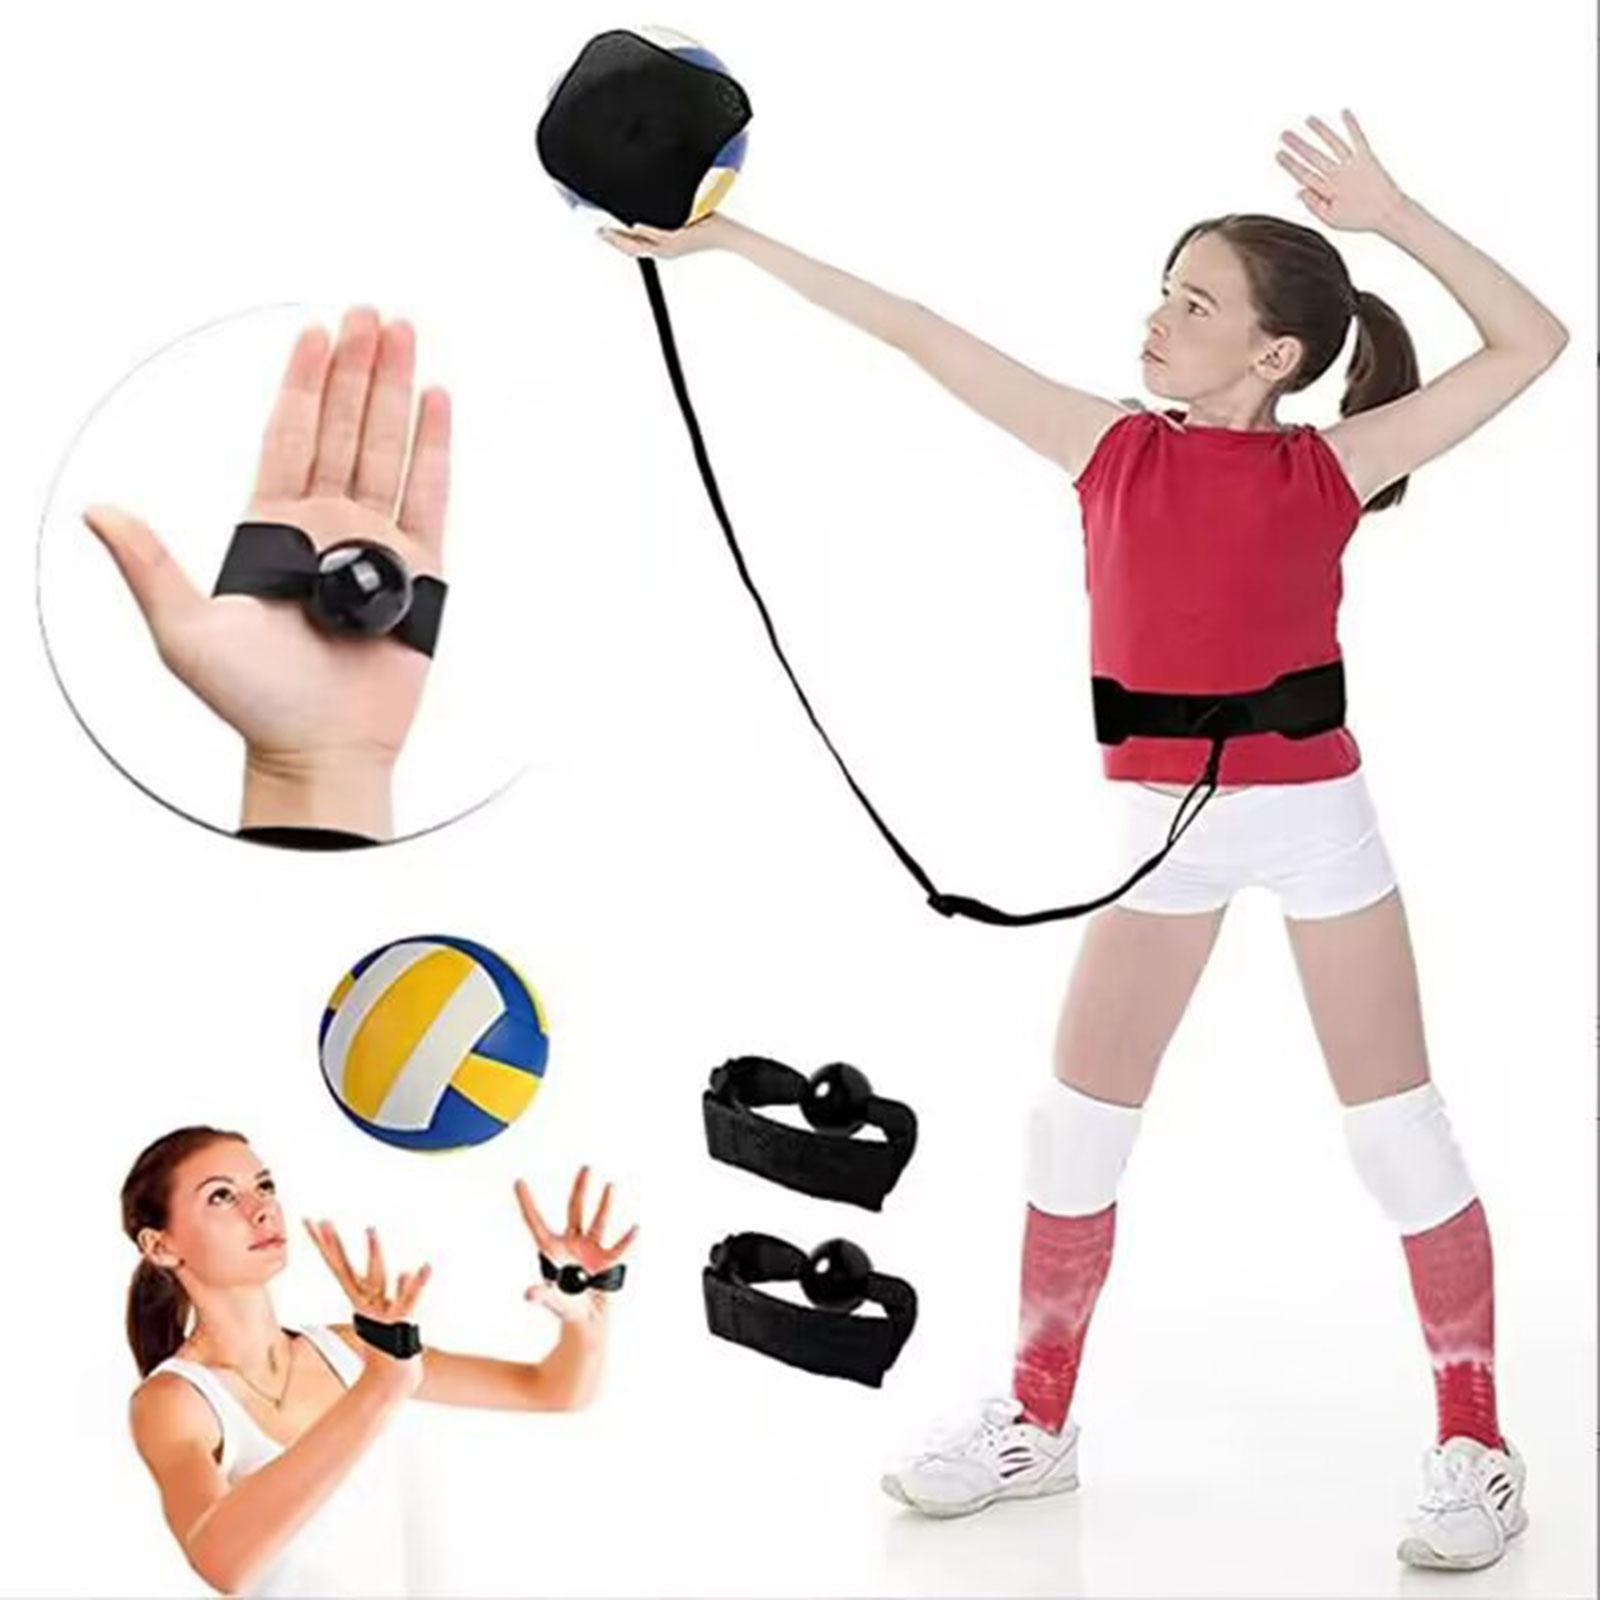 Volleyball Training Equipment Solo Volleyball Trainer Practice Adjustable Rope and Waist Length Football Training Gear for Jumping Spiking